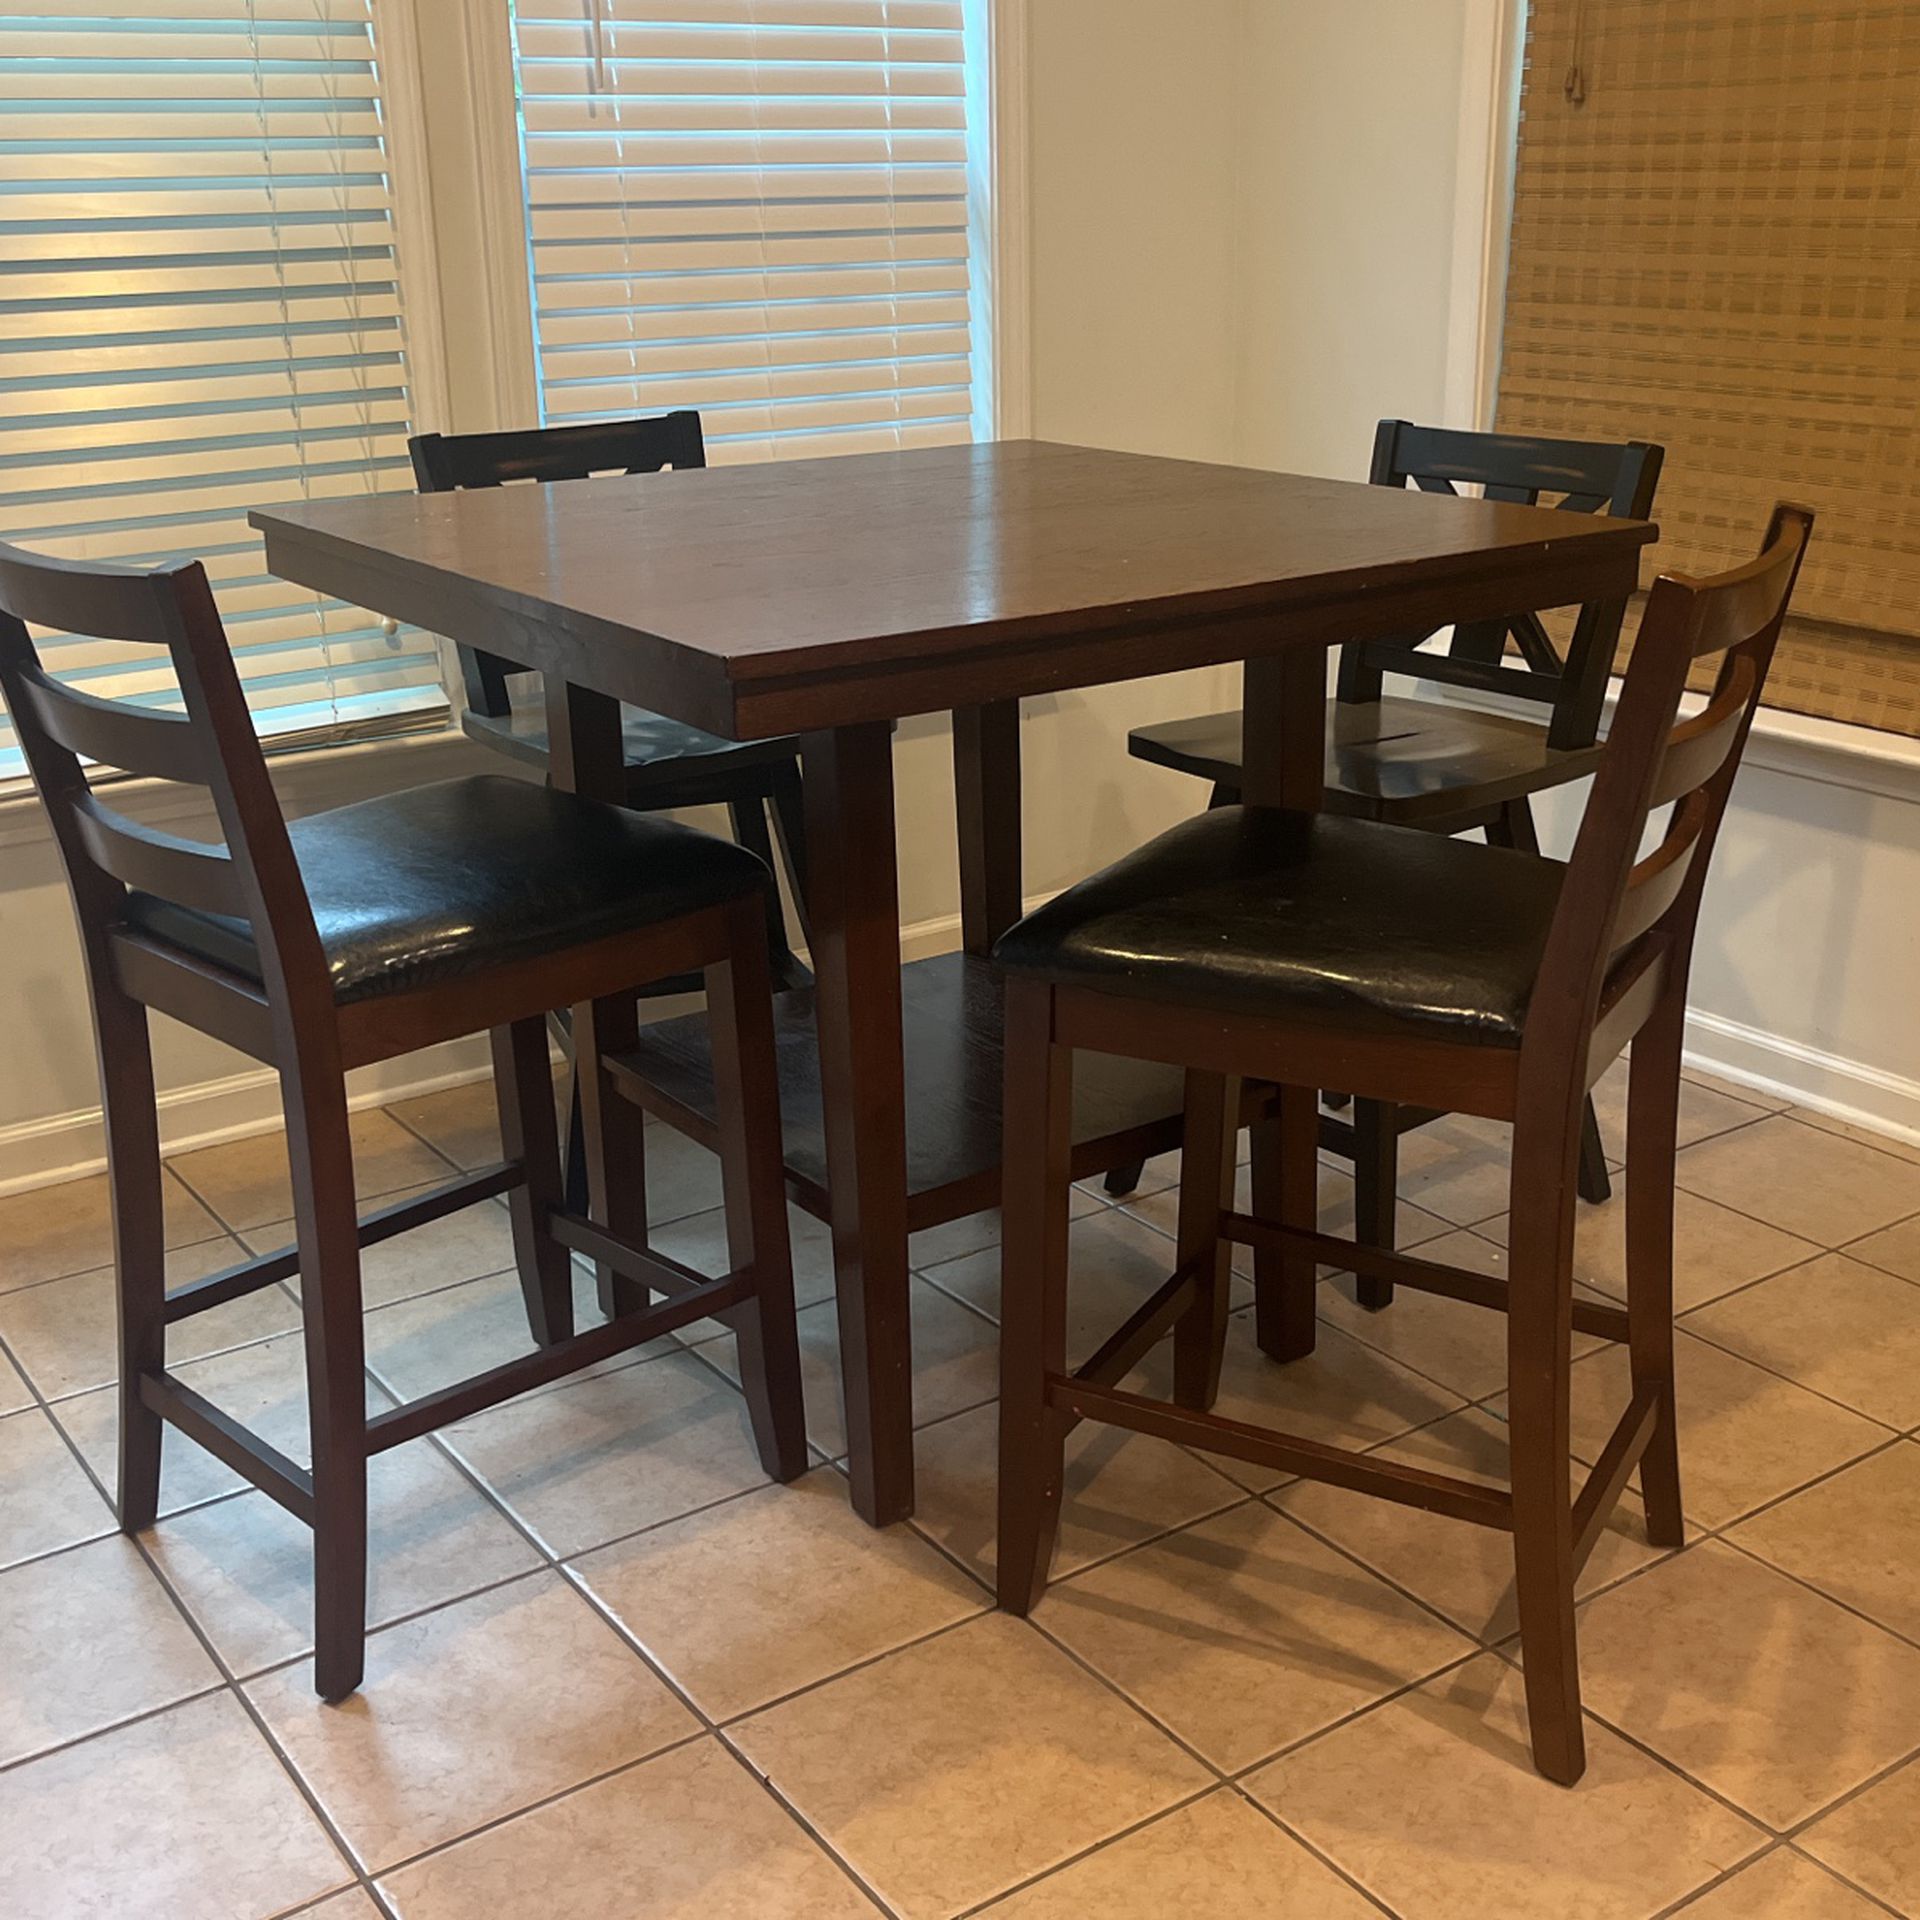 Breakfast Table With 4 Chairs 